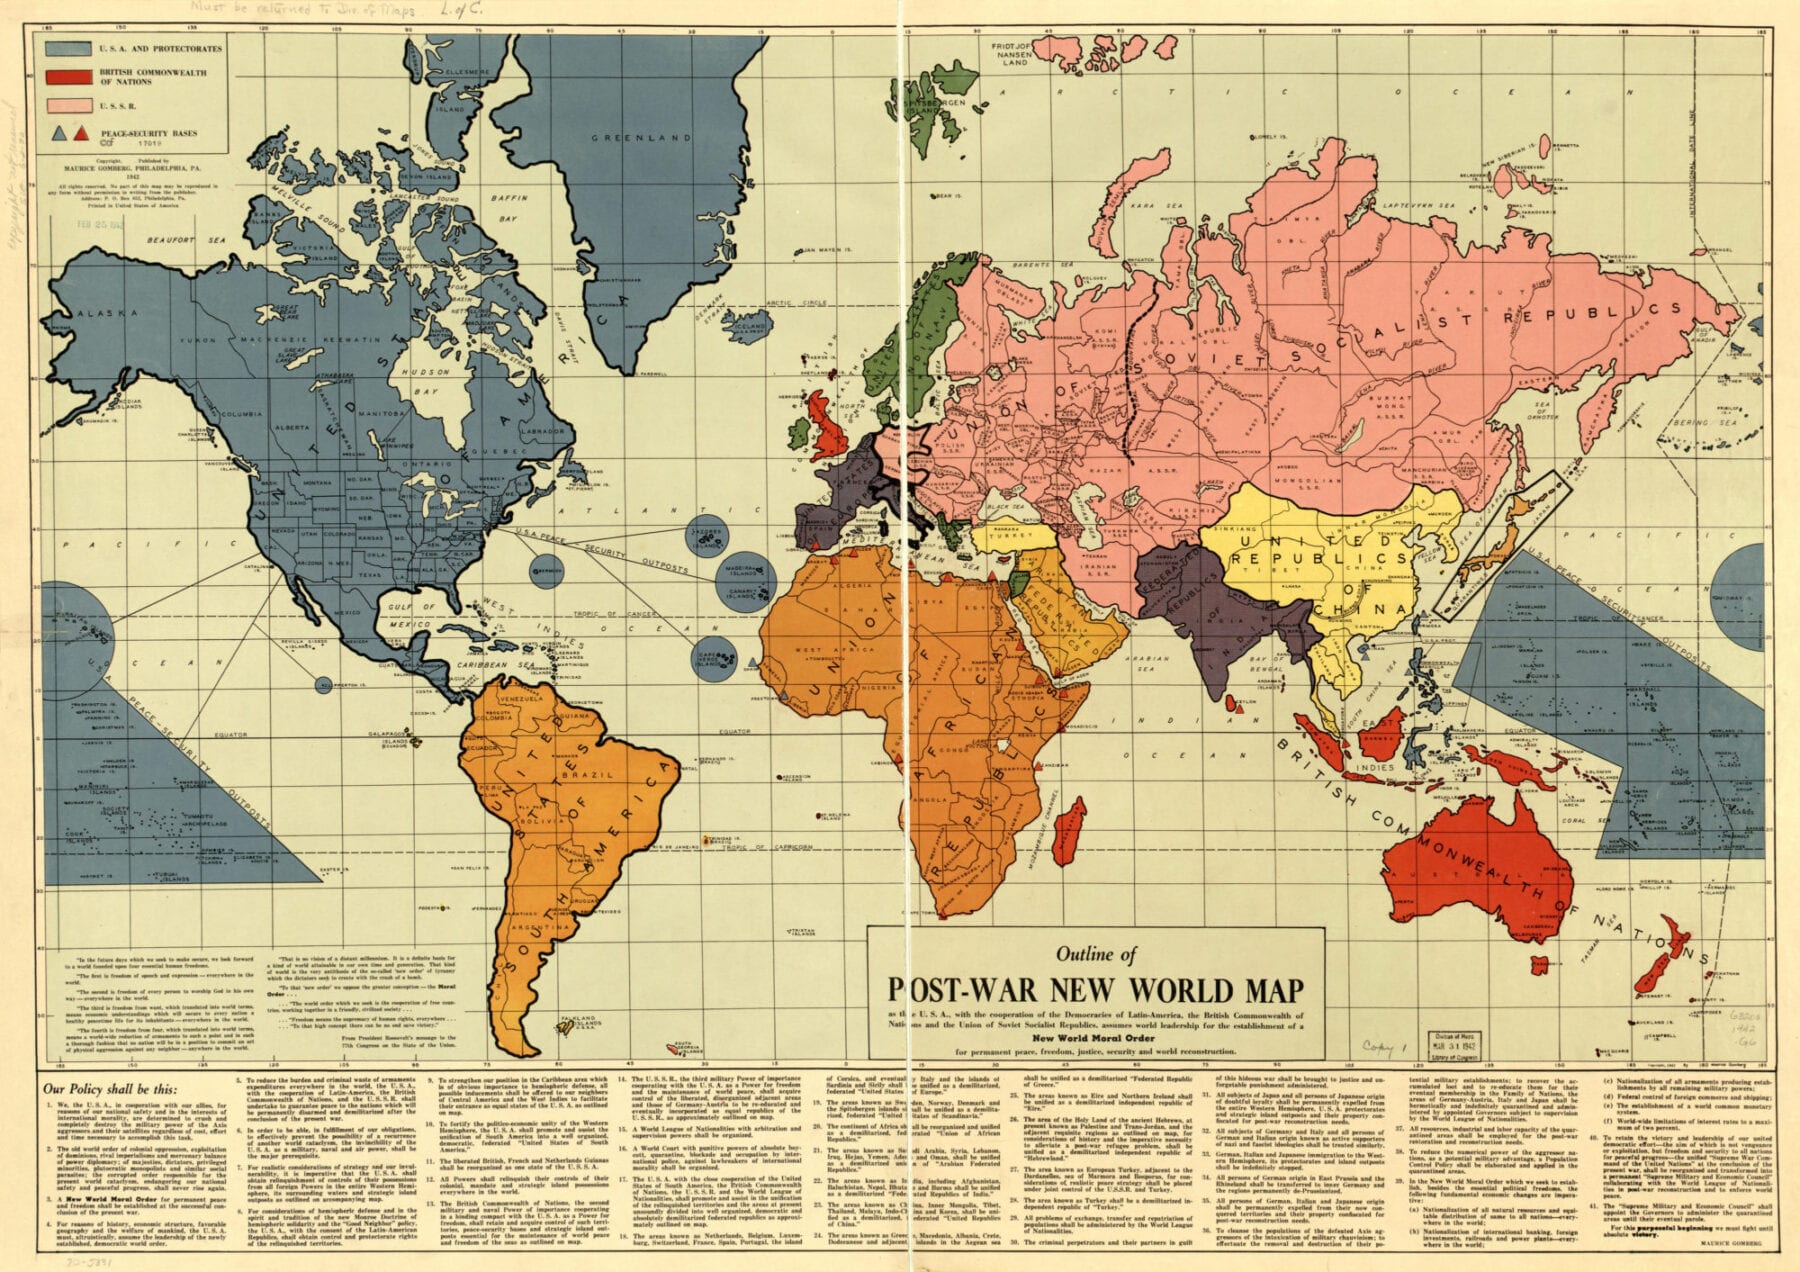 Map for a New World Order on 1941 Communist World Planning – The North American Union